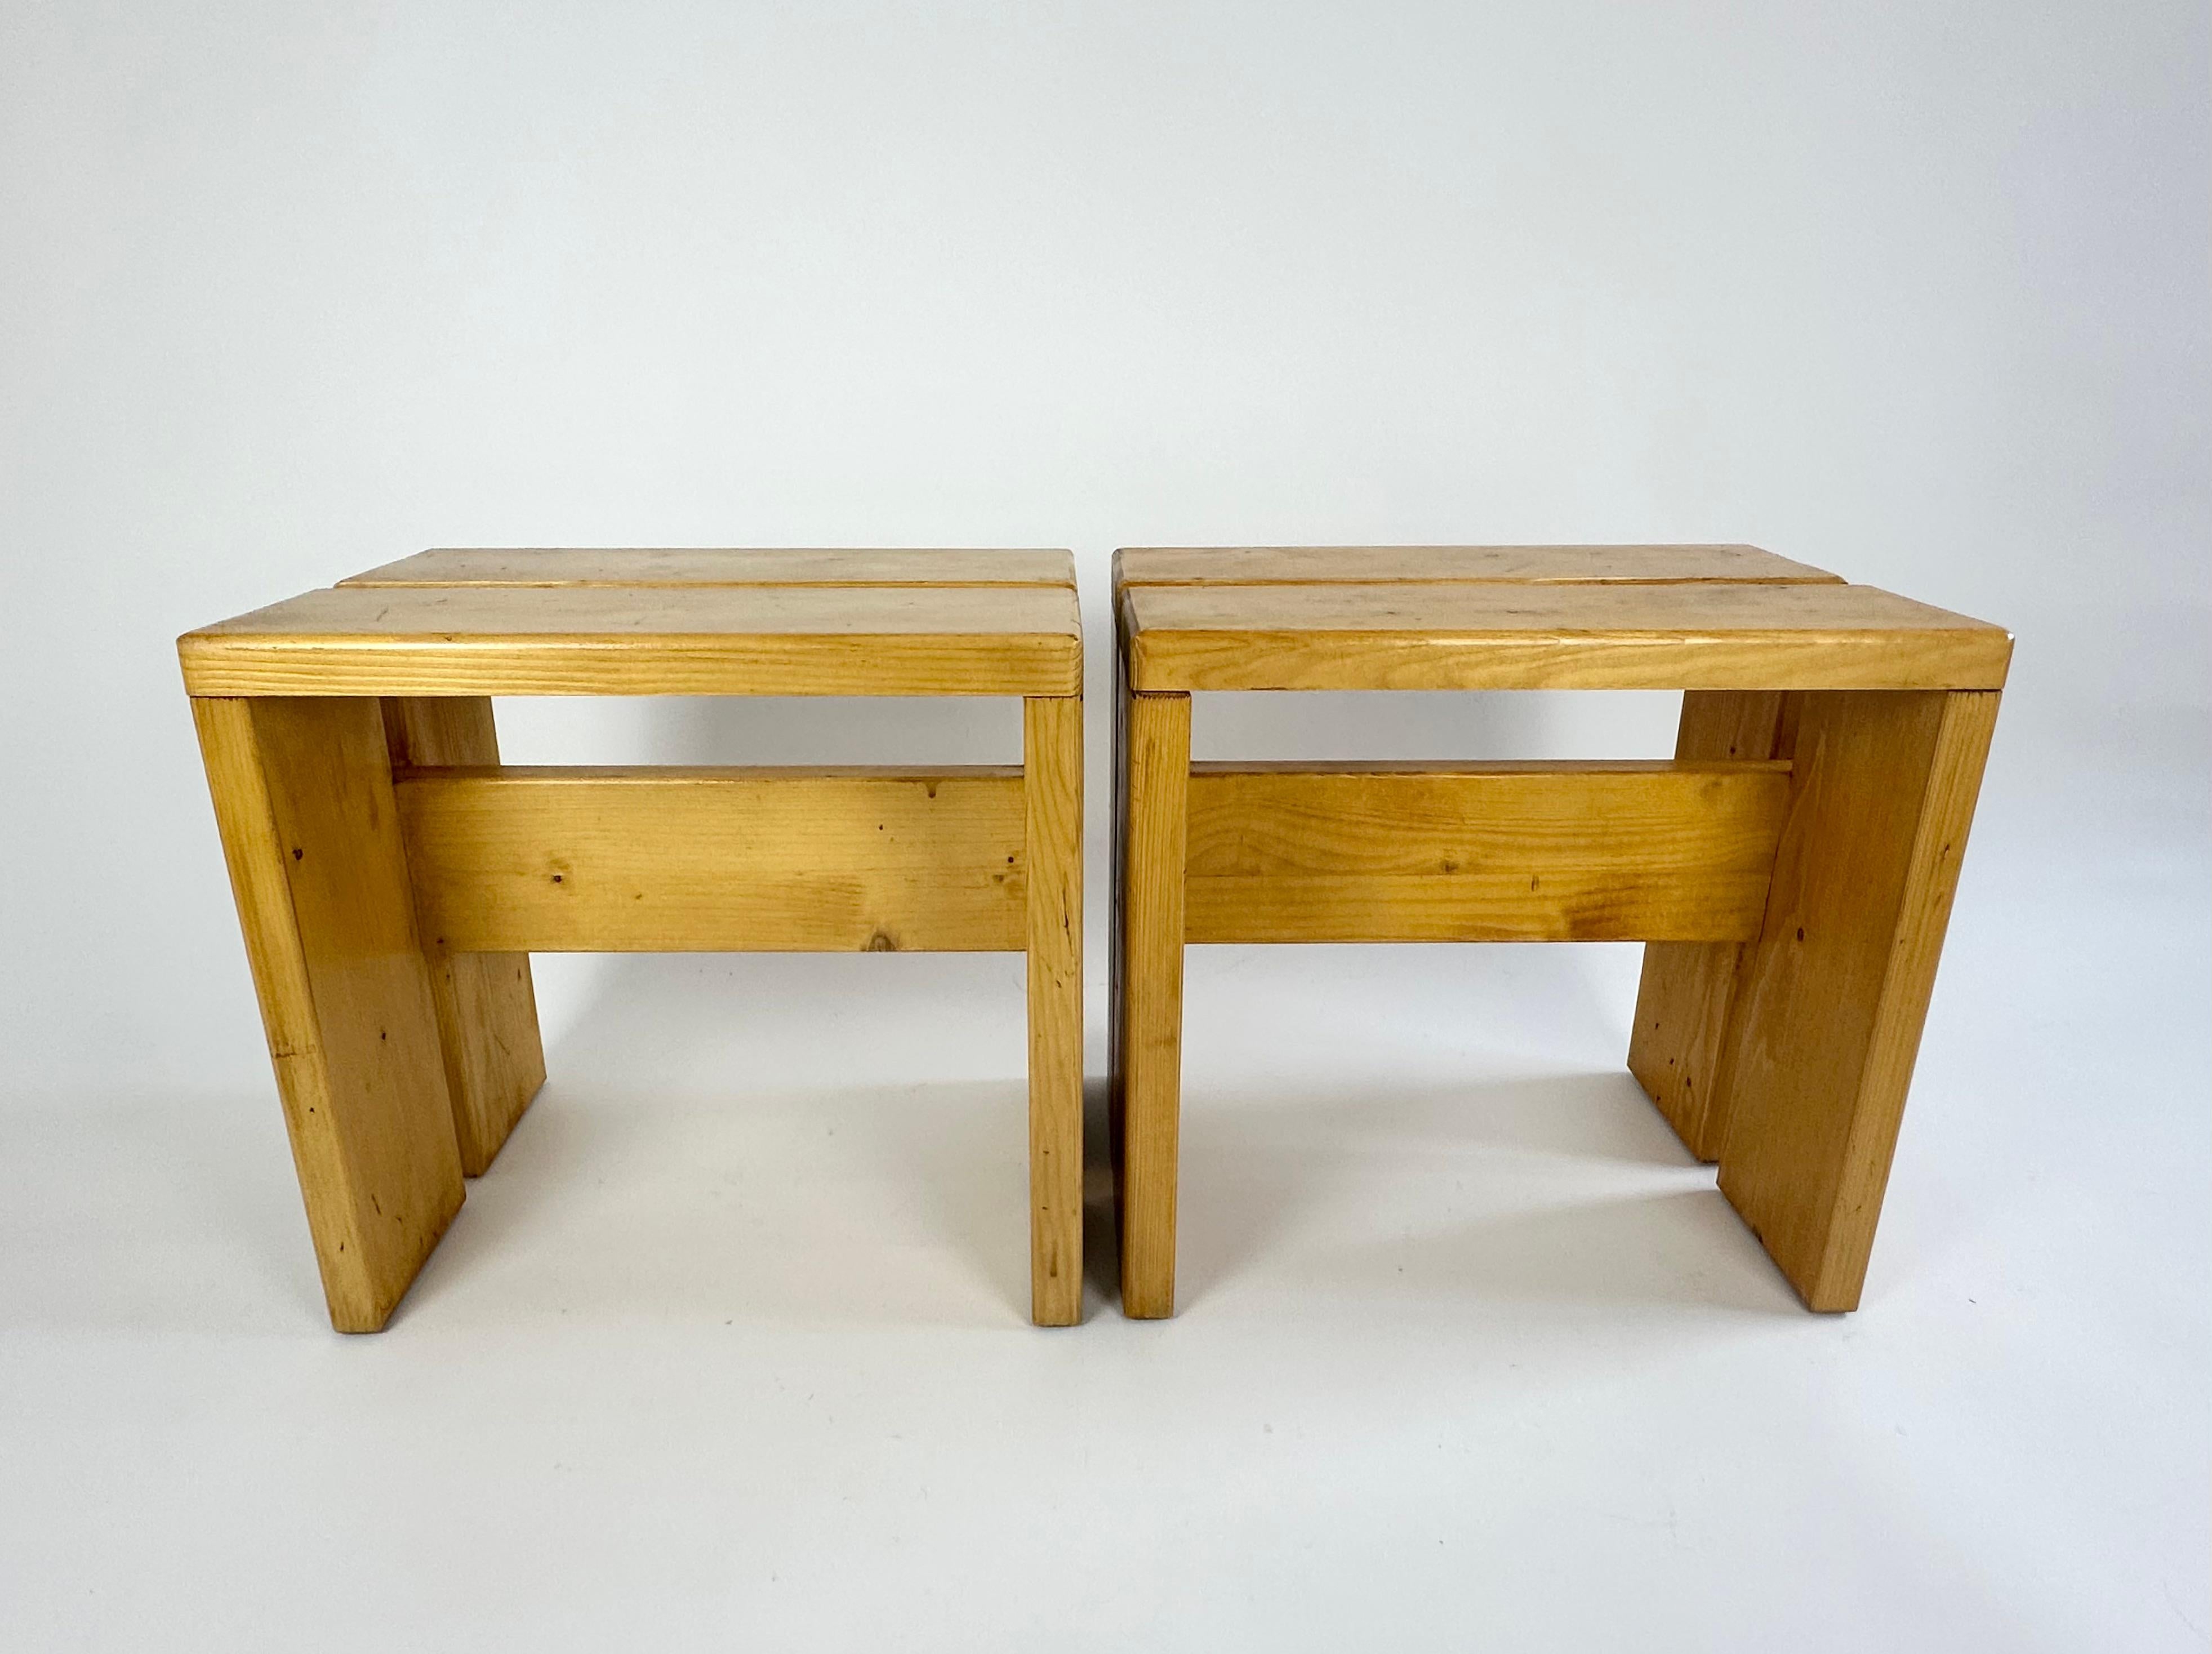 Stool/side tables selected by Charlotte Perriand for the Les Arcs resort. France, 1970s.

Made of pine. No structural damage or old repairs, very solid.

Great original condition with wear and patina as pictured, nice rich wood tone. Cleaned, ready